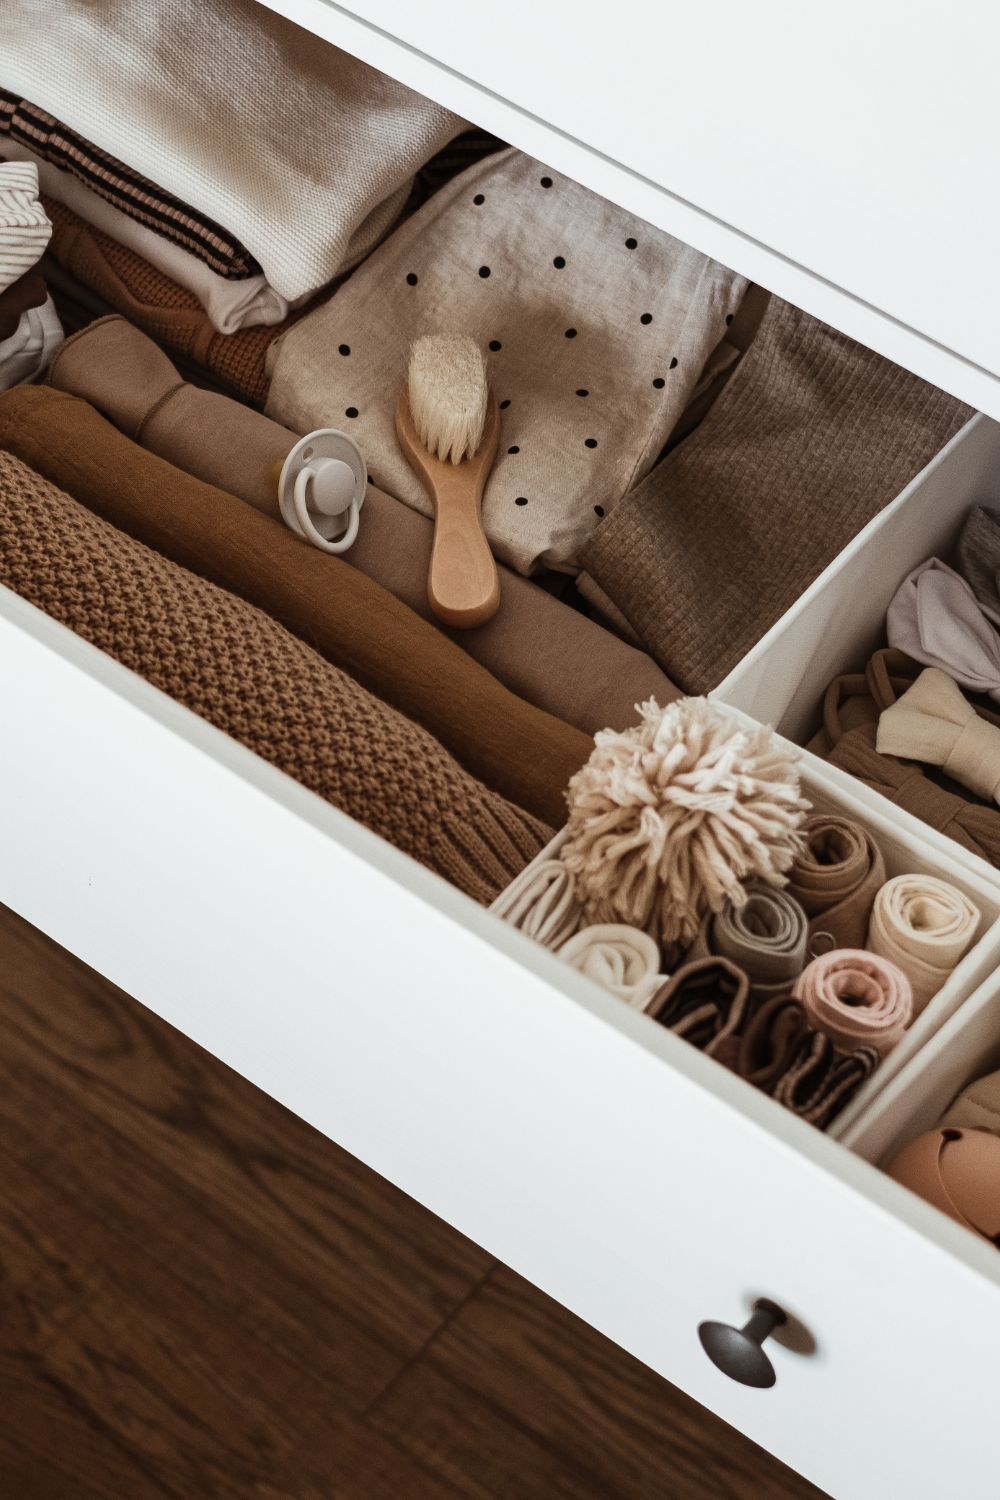 Drawer of baby clothes